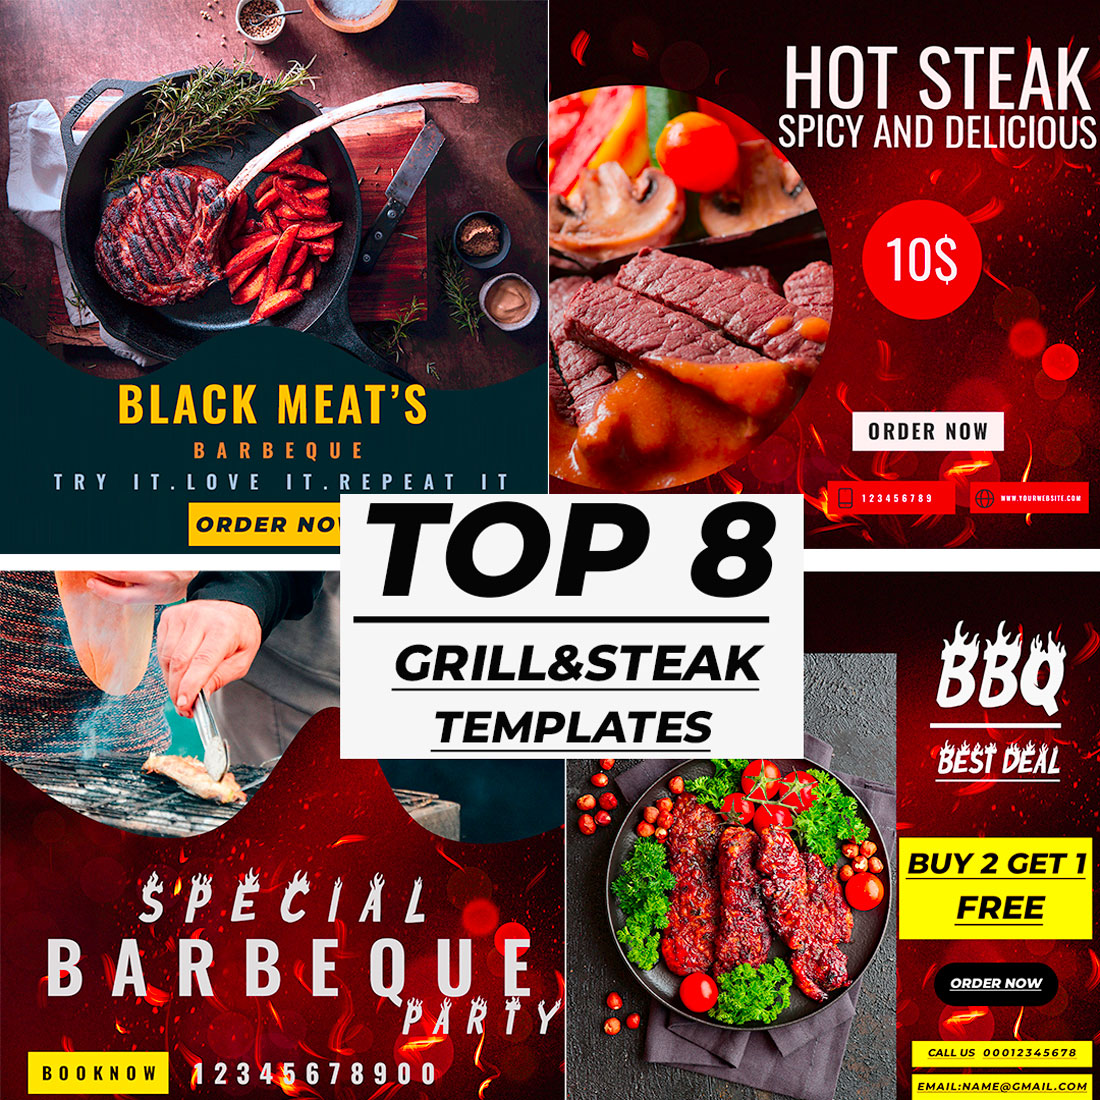 TOP 8 GRILL&STEAK TEMPLATES cover image.